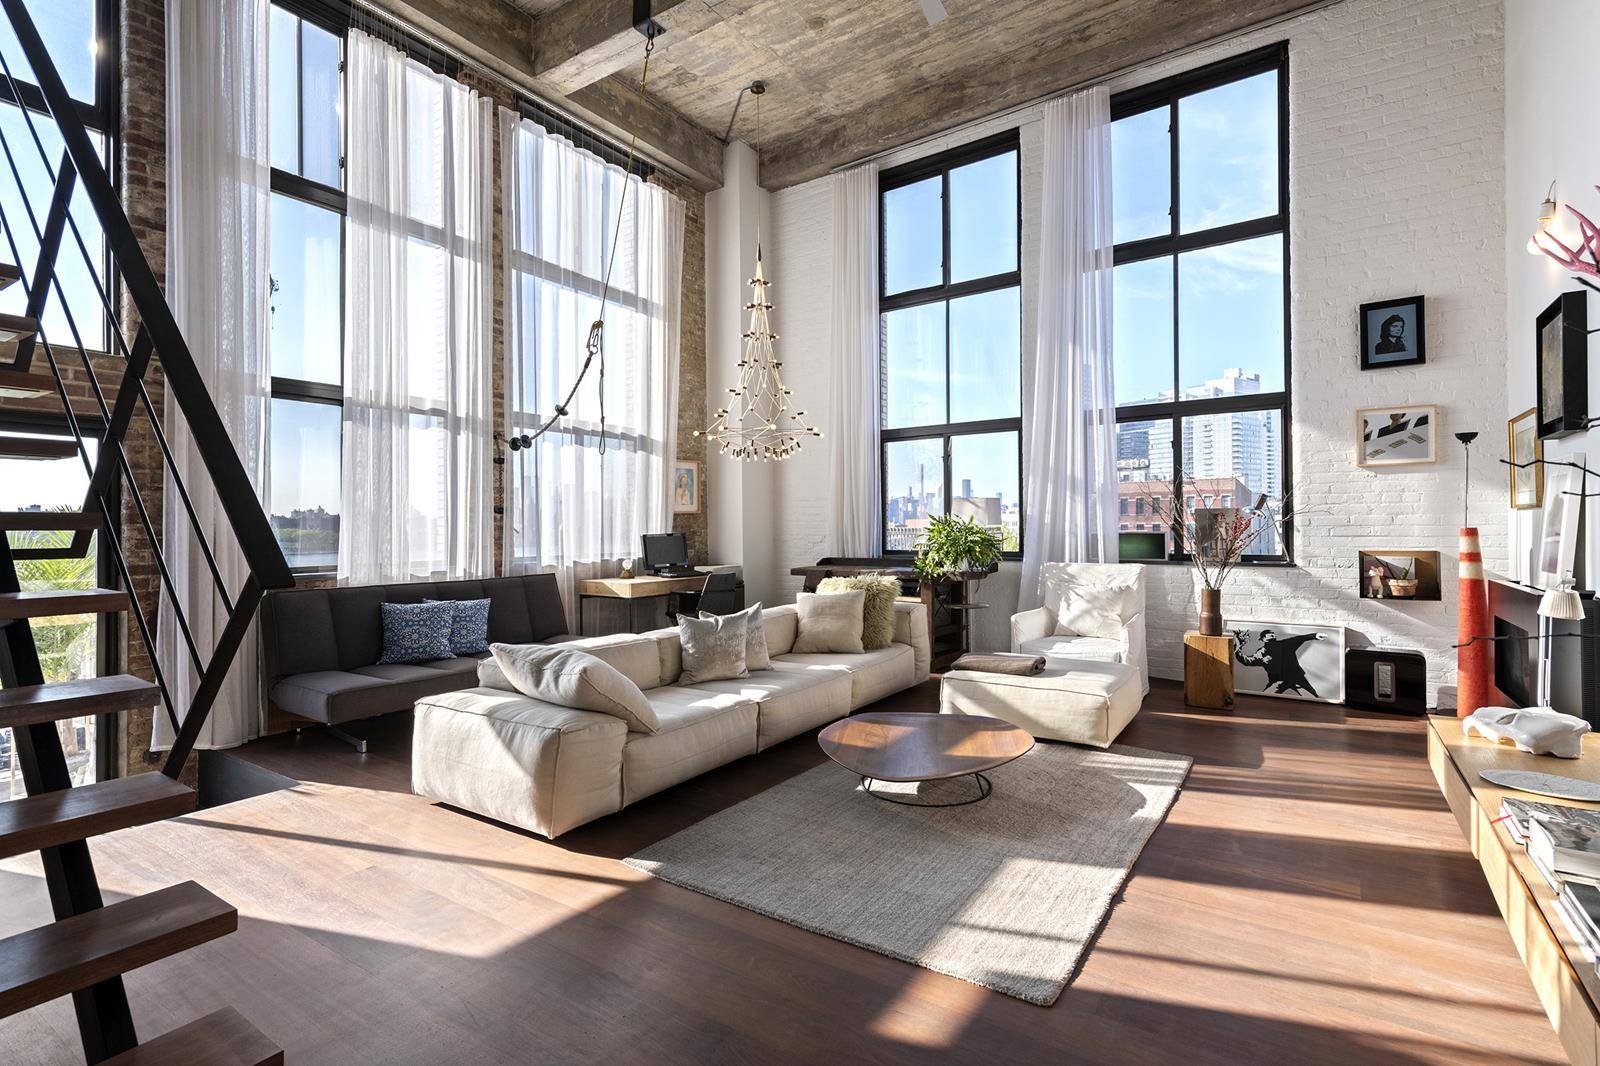 A chic designer loft overlooking the East River, this one of a kind 4 bedroom, 2 bathroom corner loft brushes an eclectic palette of warm, organic textures upon a prewar ...